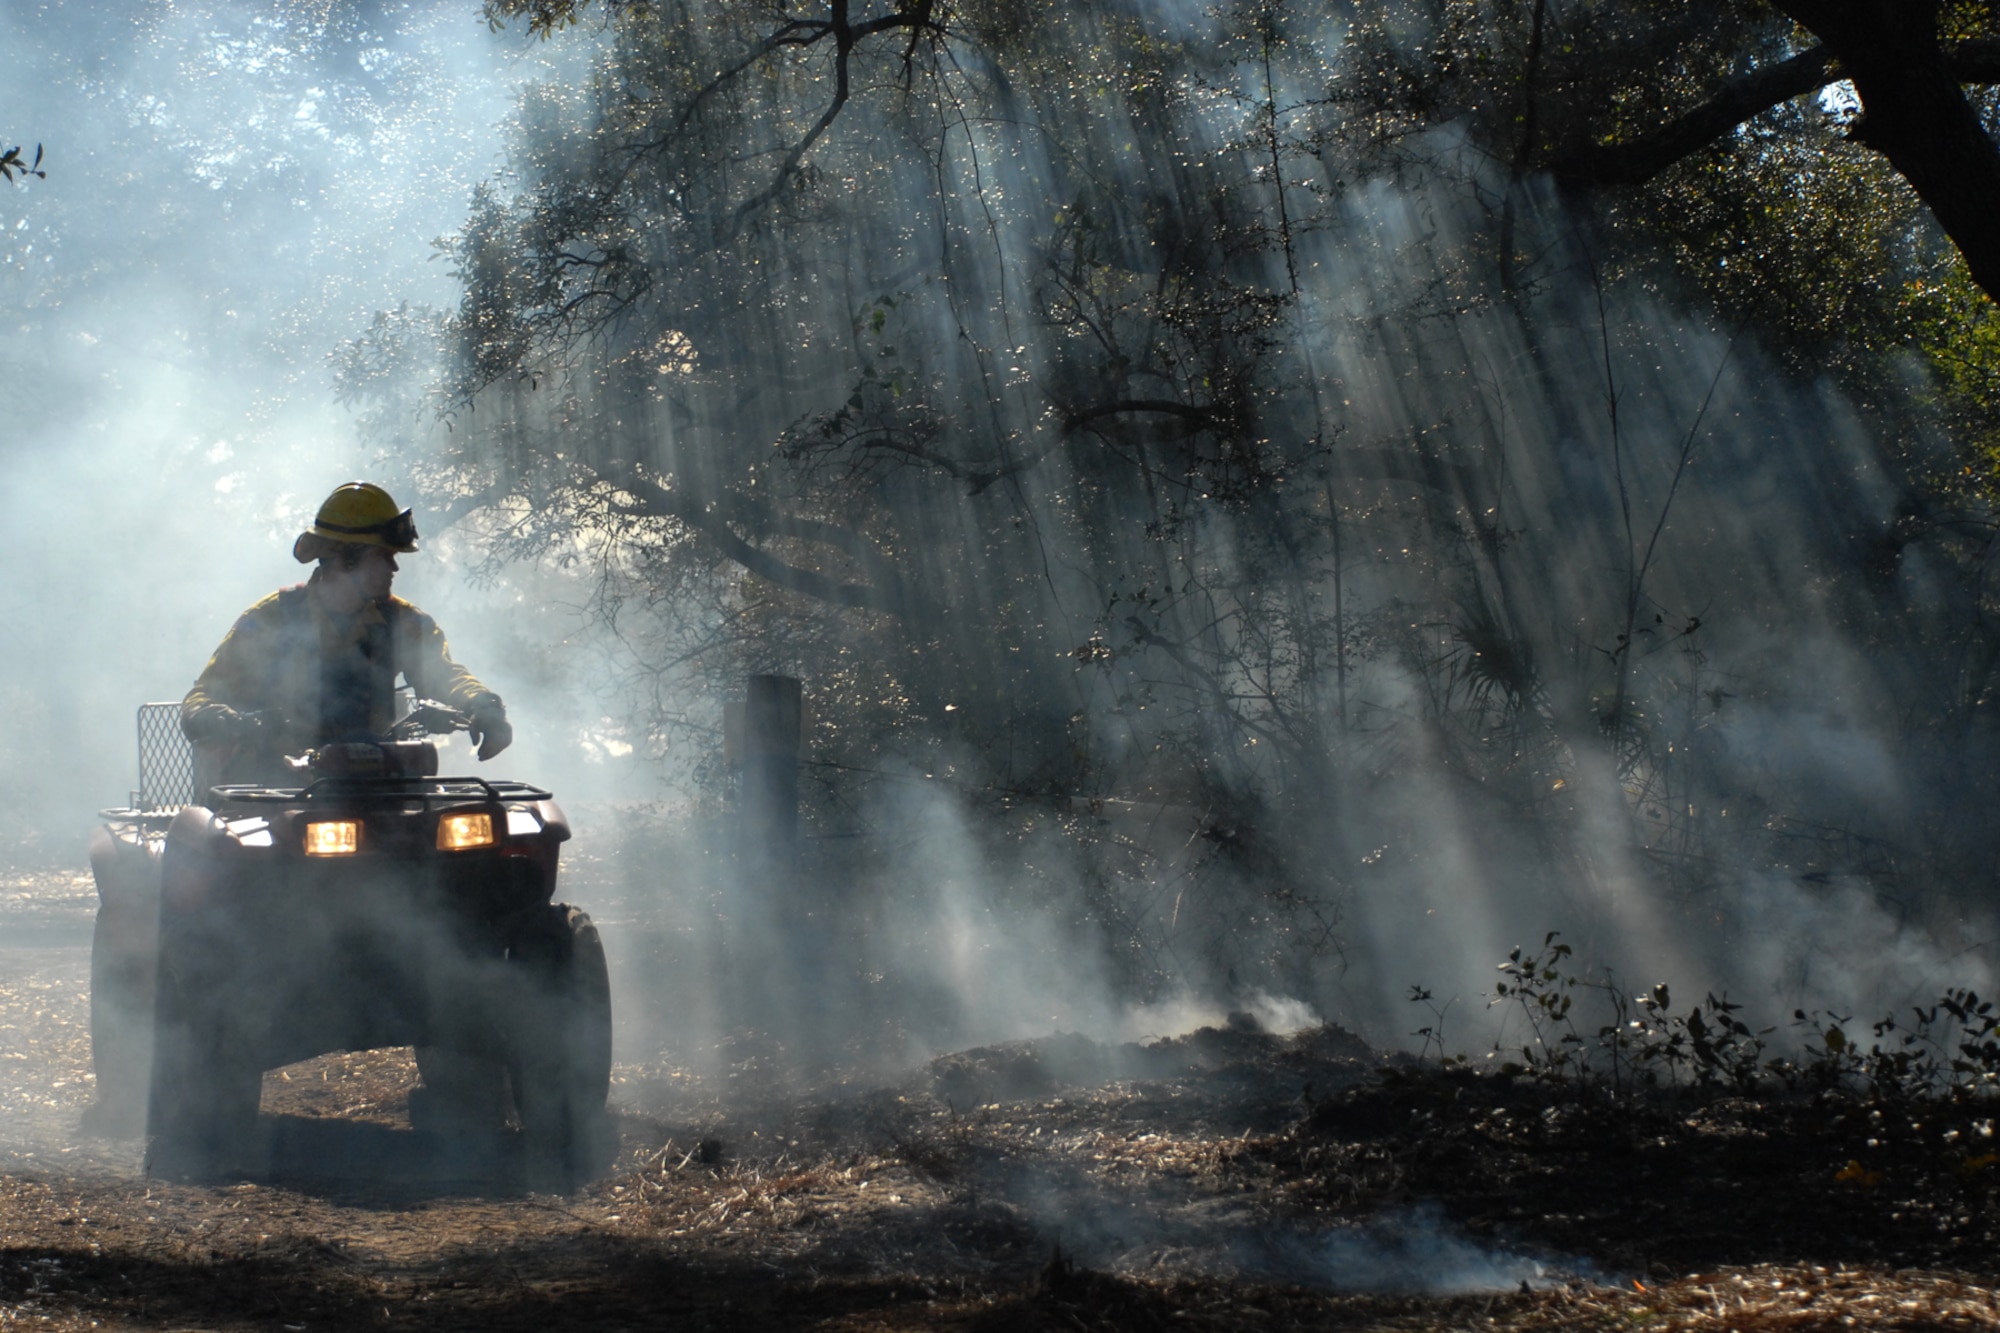 EGLIN AIR FORCE BASE, Fla. ? Ryan Campbell, a Jackson Guard forestry technician and wildland fire specialist, navigates an all-terrain vehicle through smoke looking over the charred area during a prescribed burn at White Point, an 85-acre recreation area on the Choctawhatchee Bay Jan. 29. Many native plants and animal species depend on Eglin?s fire-dependent long-leaf pine ecosystem, 11 of which are federally protected. Endangered species such as the red-cockaded woodpecker, depend on fire that is typically caused by either lightning strikes or Eglin's resident fire managers to survive. As of the 2008 control burn season, Jackson Guard?s five-year average is 73,000 acres burned annually. (U.S. Air Force Photo by Staff Sgt. Mike Meares)